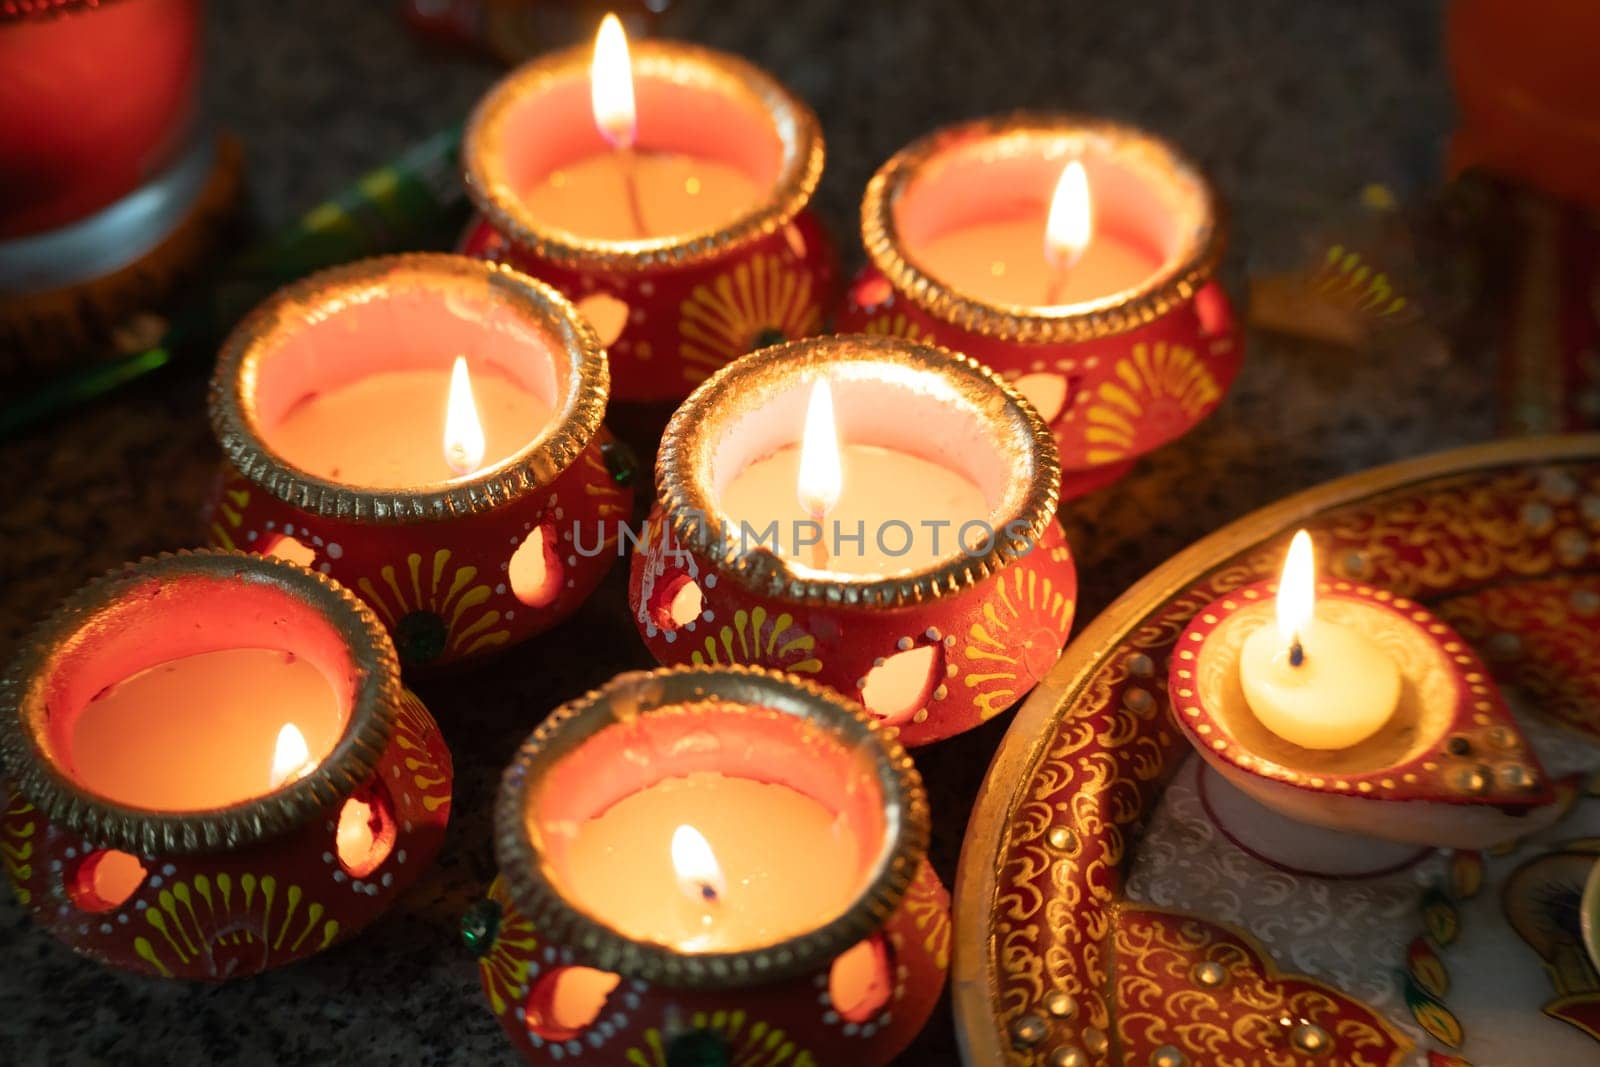 beautifully decorated diyas lit on the eve of diwali and the Ram temple Pran Pratishtha consecration celebrated across India and globally by Shalinimathur